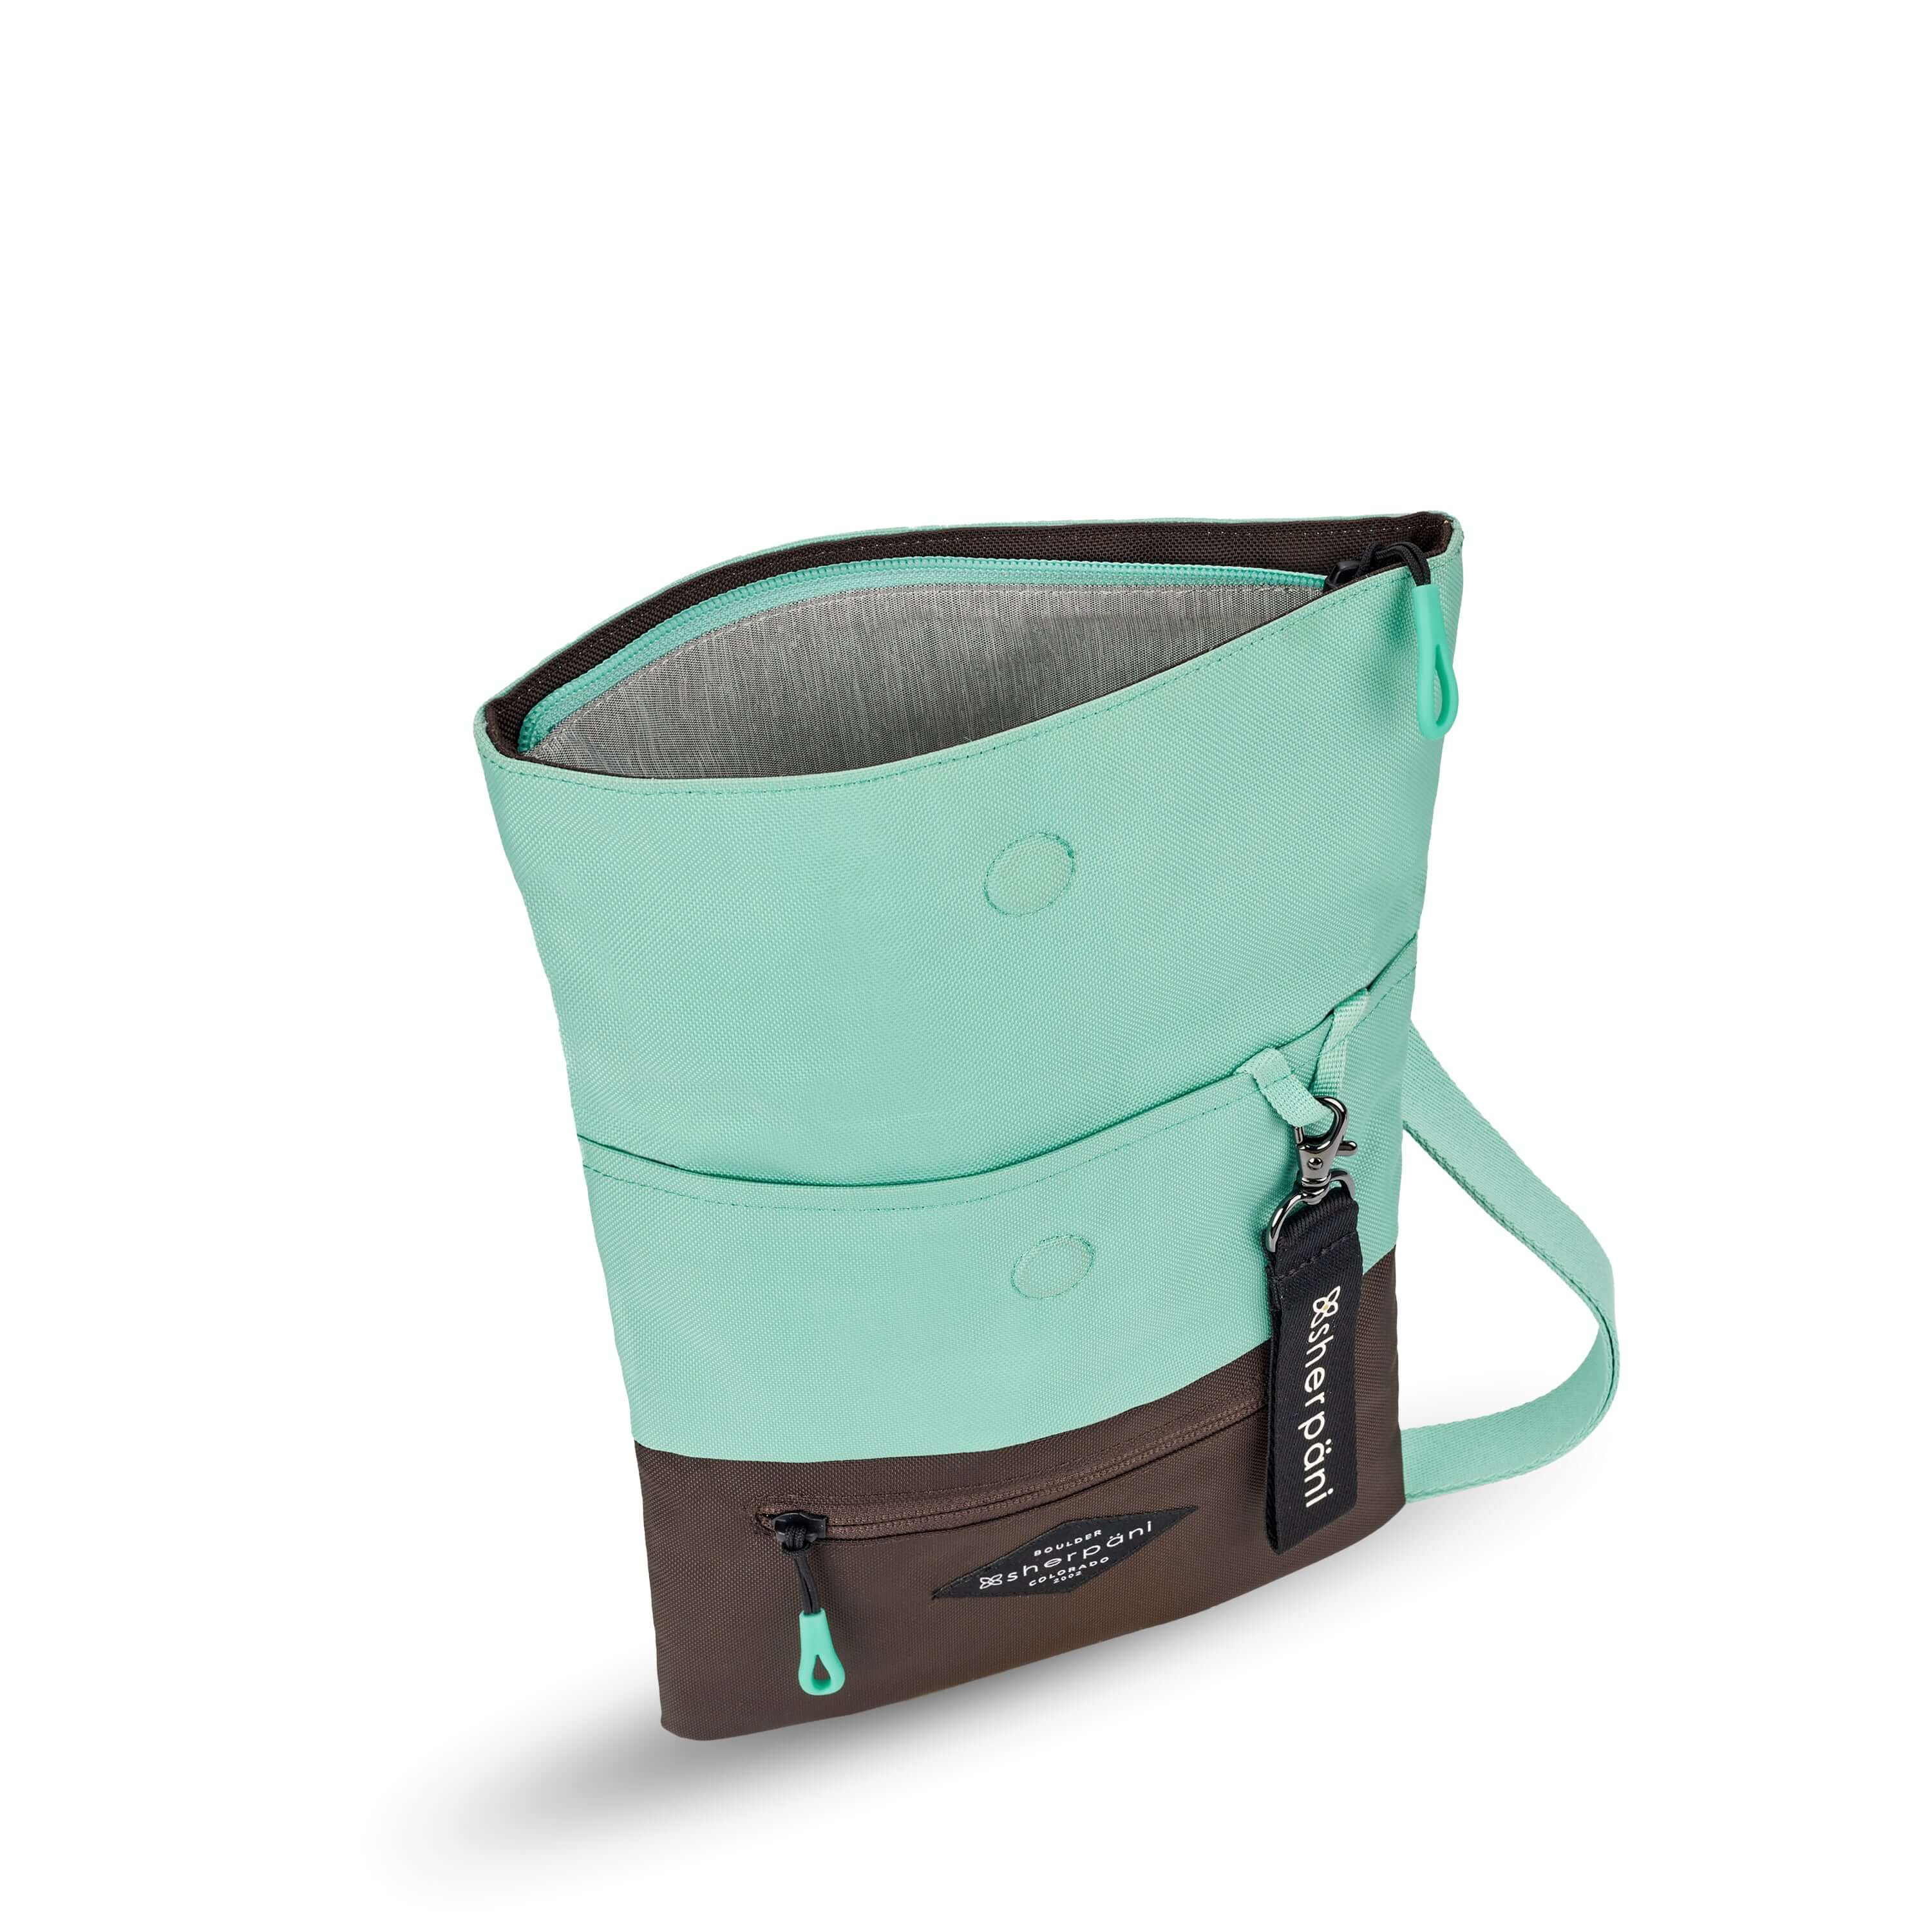 Top view of Sherpani crossbody, the Pica in Seagreen. The bag is unfolded to stand tall and the main zipper compartment is open to reveal a light gray interior. 